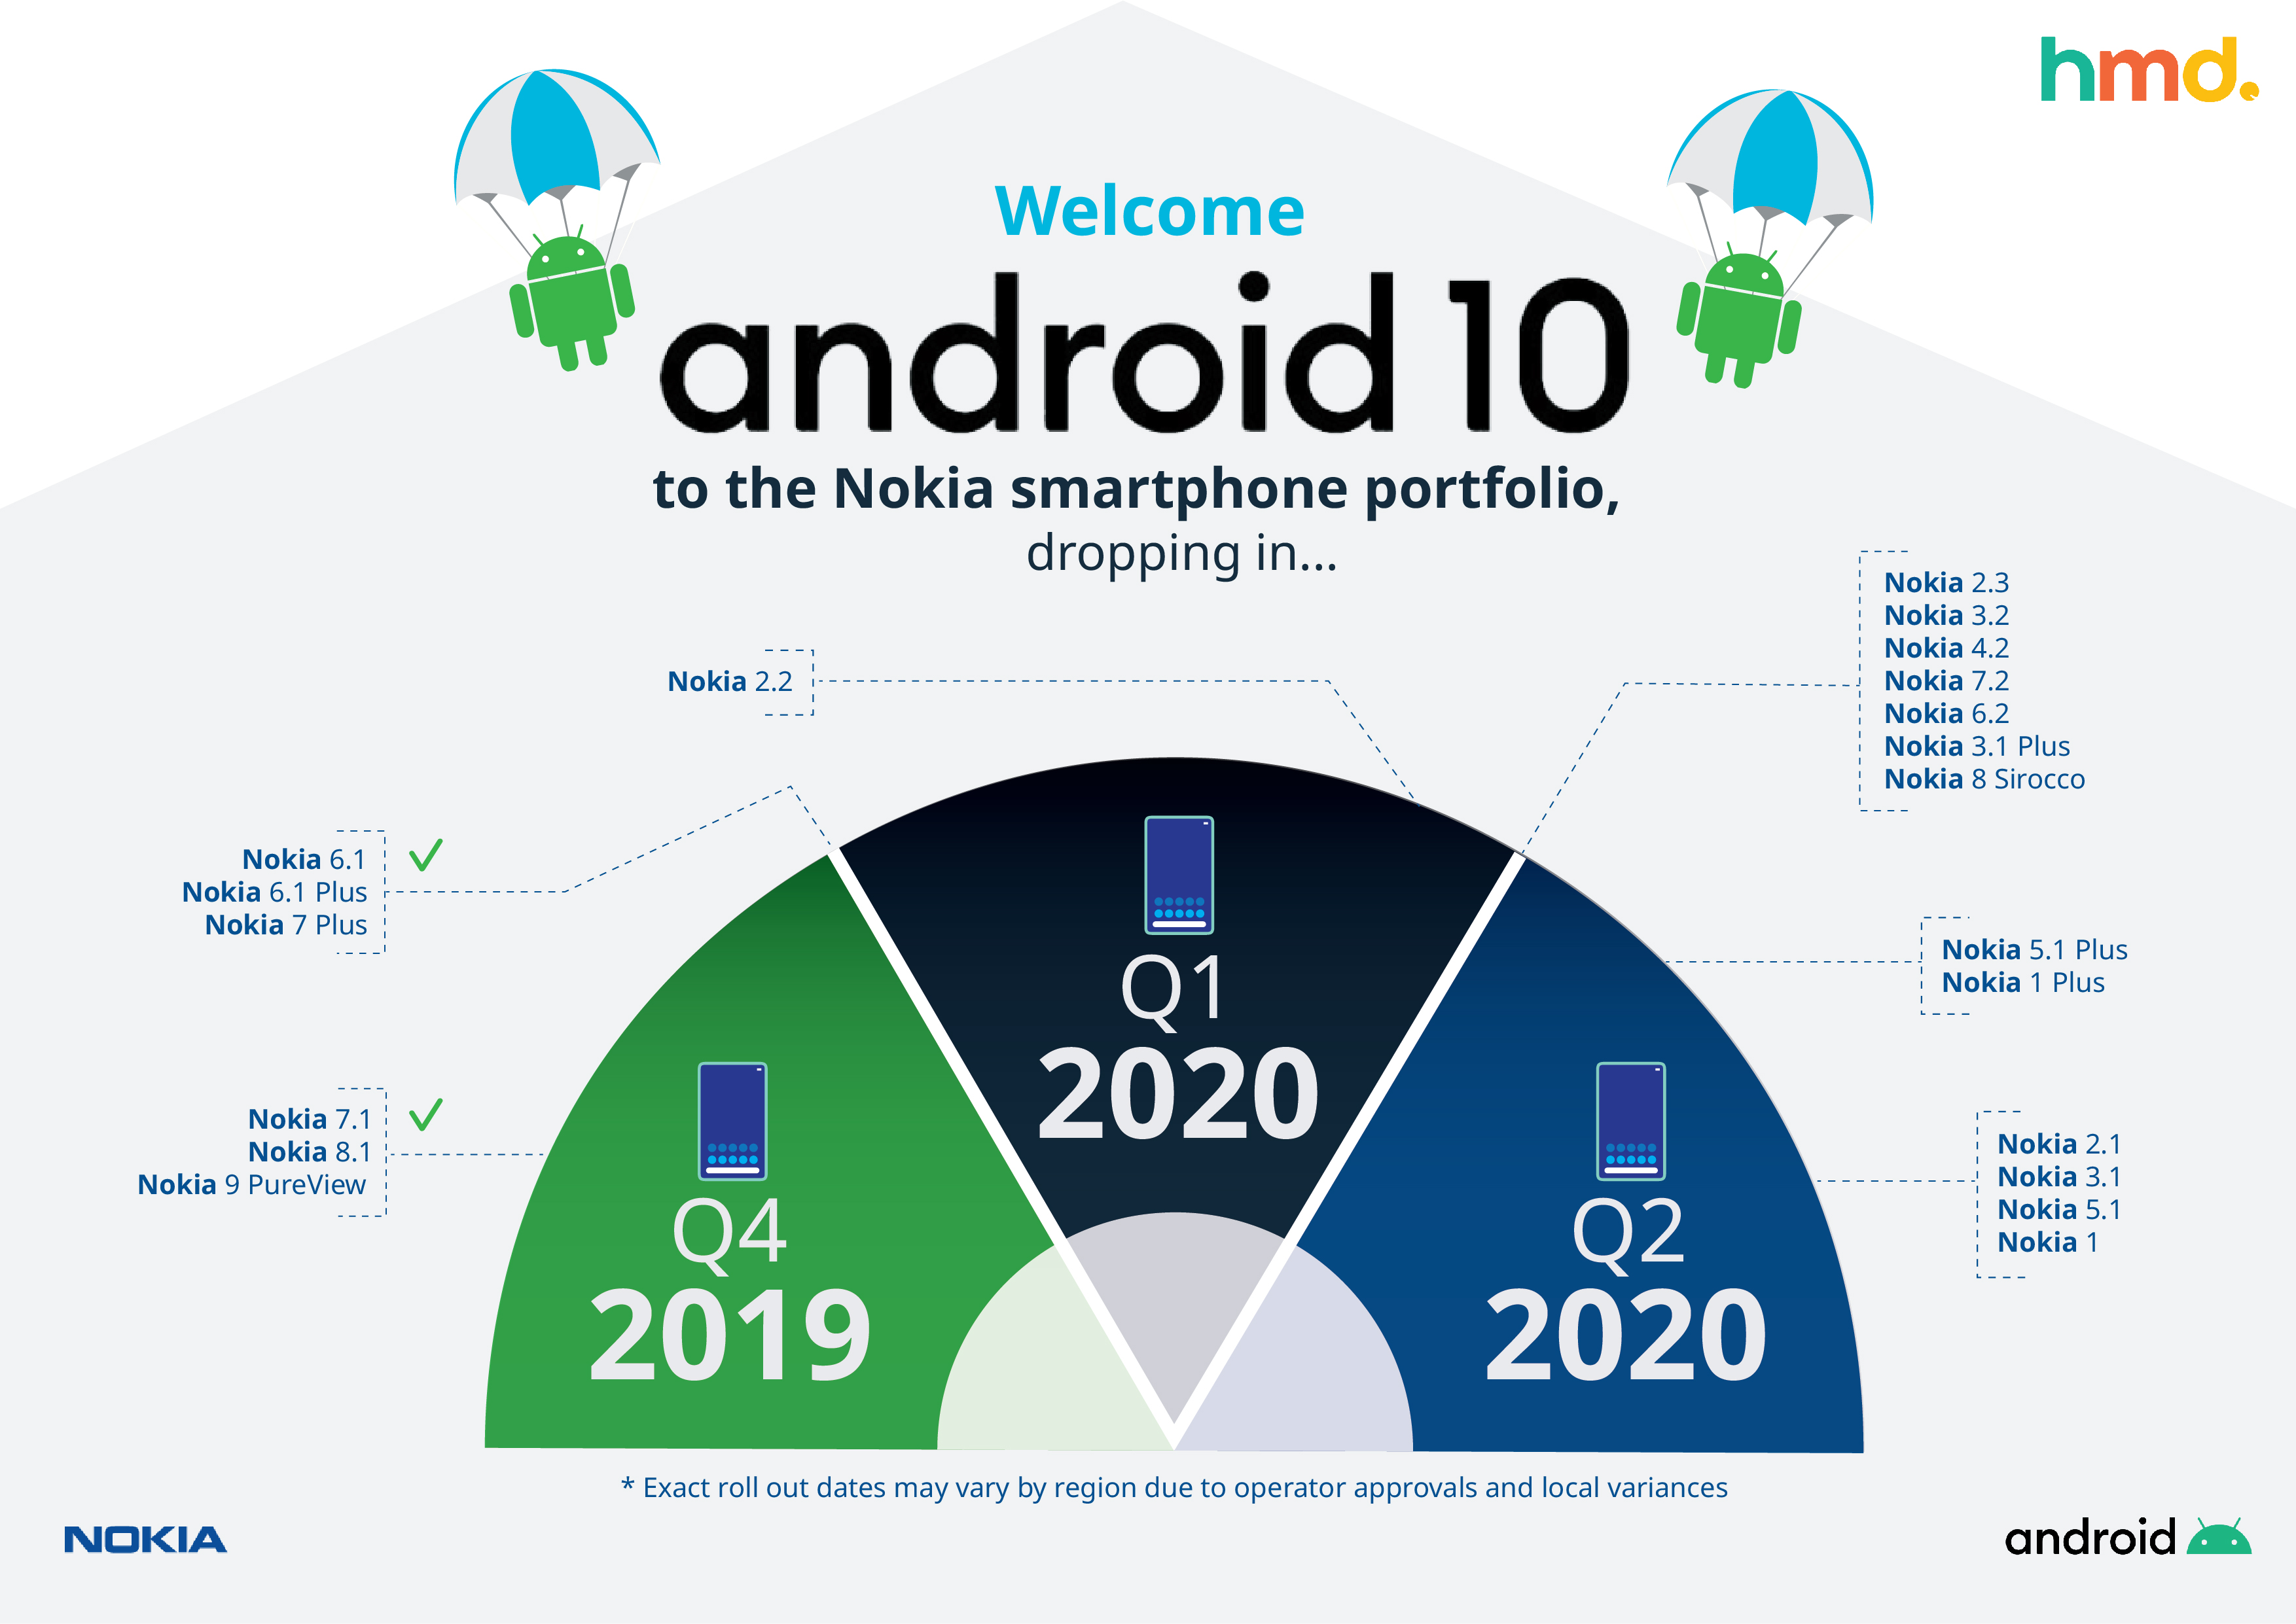 nokia android 10 schedule revised